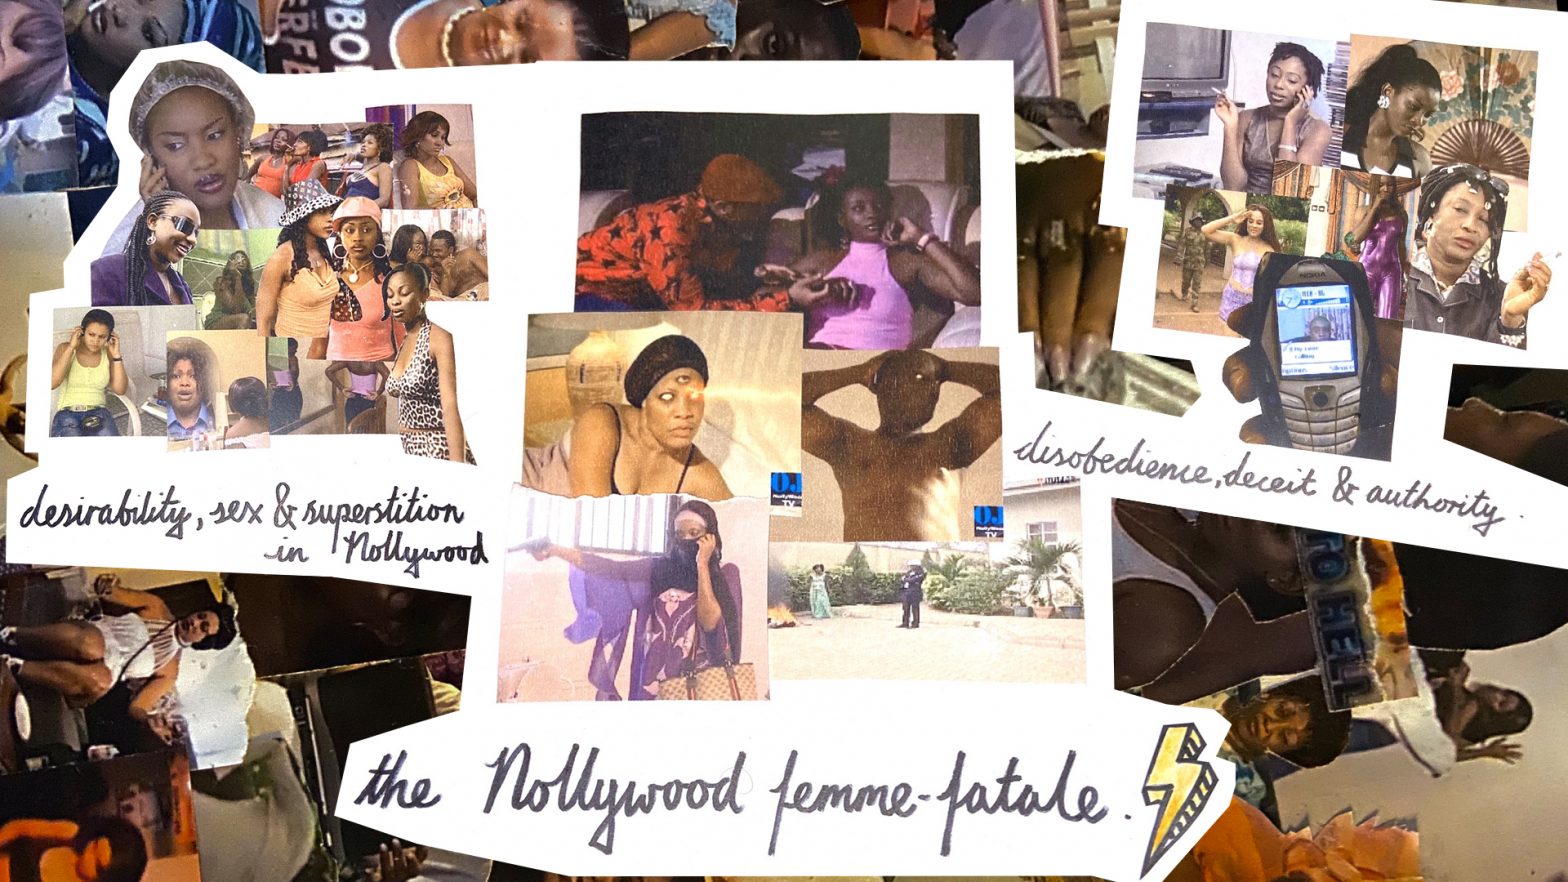 A collage of images of women in Nollywood movies. Three text selections read: "desirability, sex & superstition in Nollywood", "The Nollywood Femme Fatale", and "disobedience, deceit and authority"